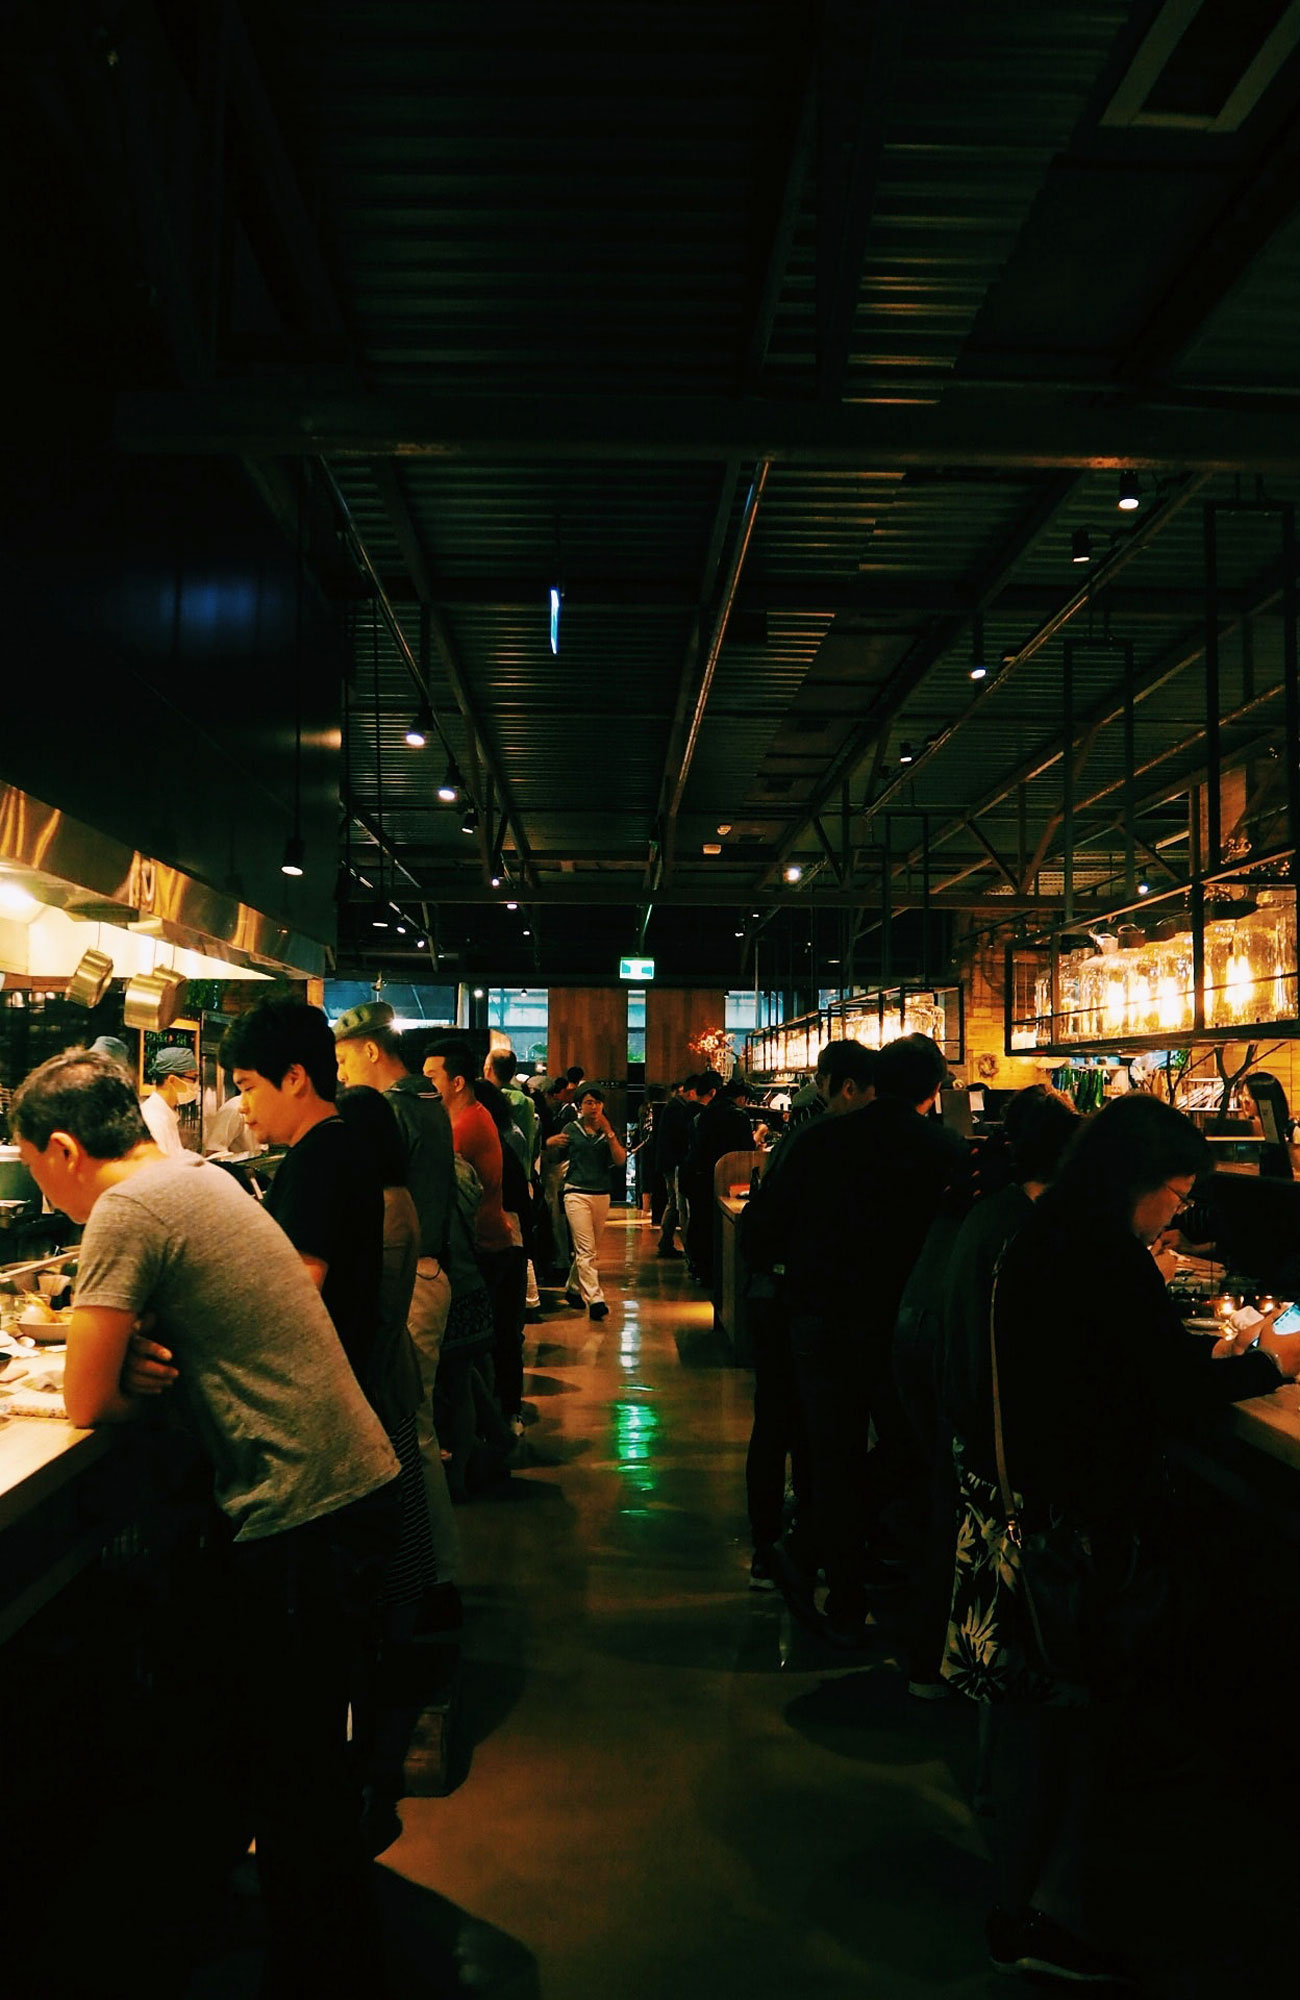 Solo Travel Beginners Guide - Crowded food hall in Asia - Blog - KILROY